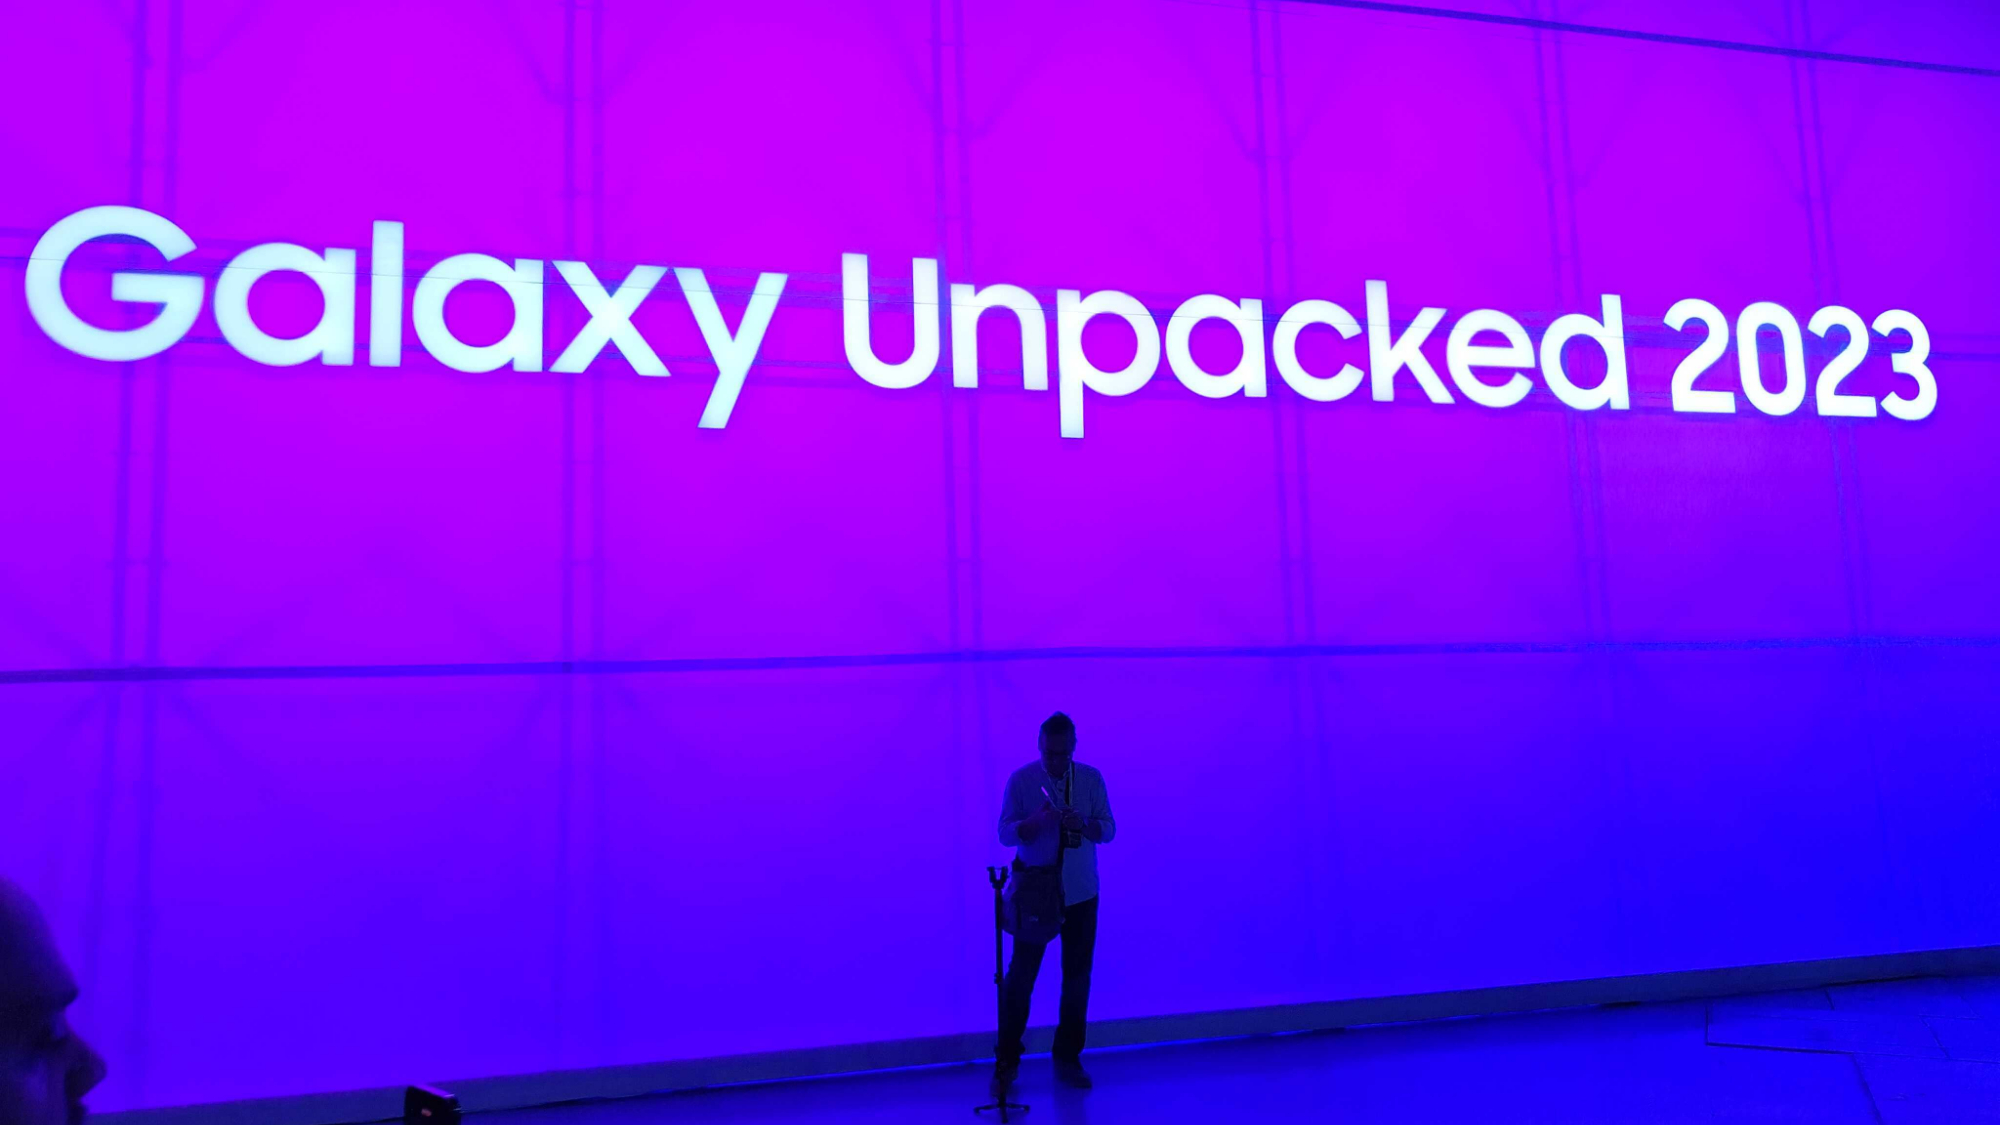 A shot from the Galaxy Unpacked event